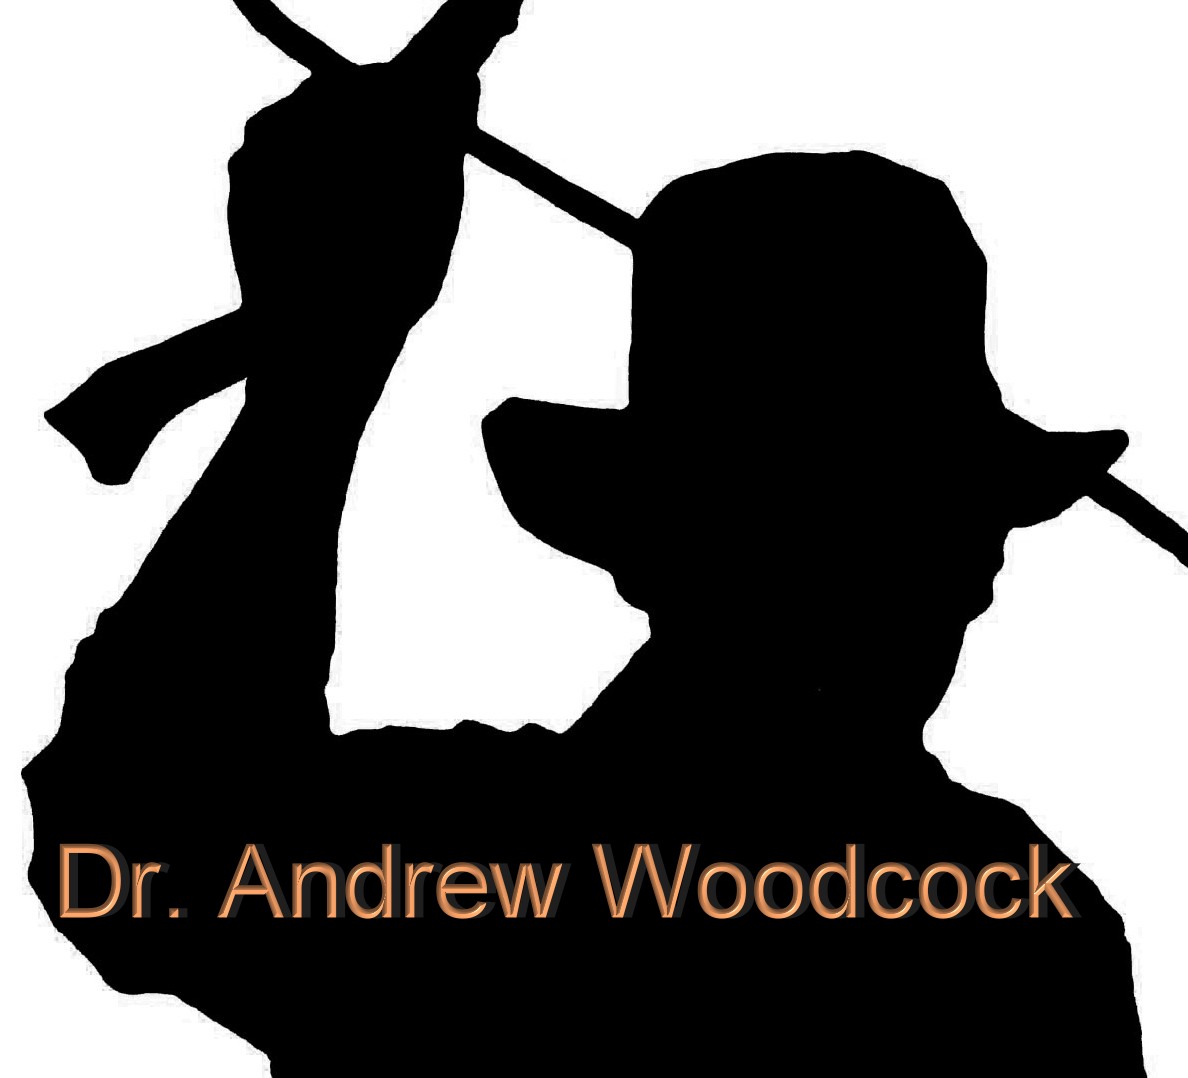 Dr. Andrew Woodcock